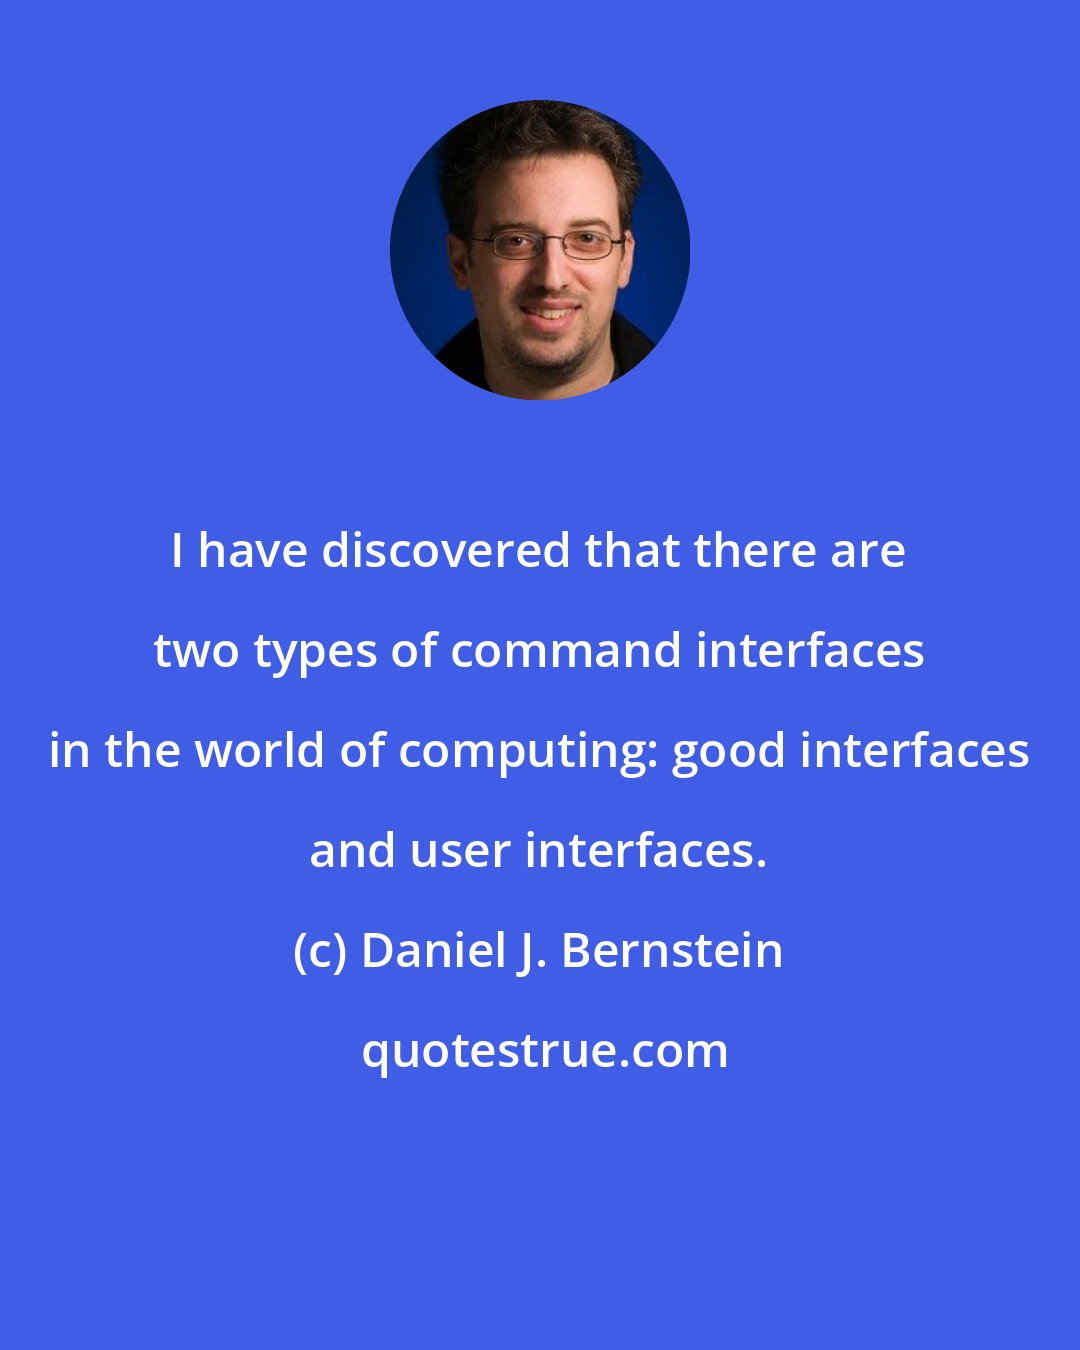 Daniel J. Bernstein: I have discovered that there are two types of command interfaces in the world of computing: good interfaces and user interfaces.